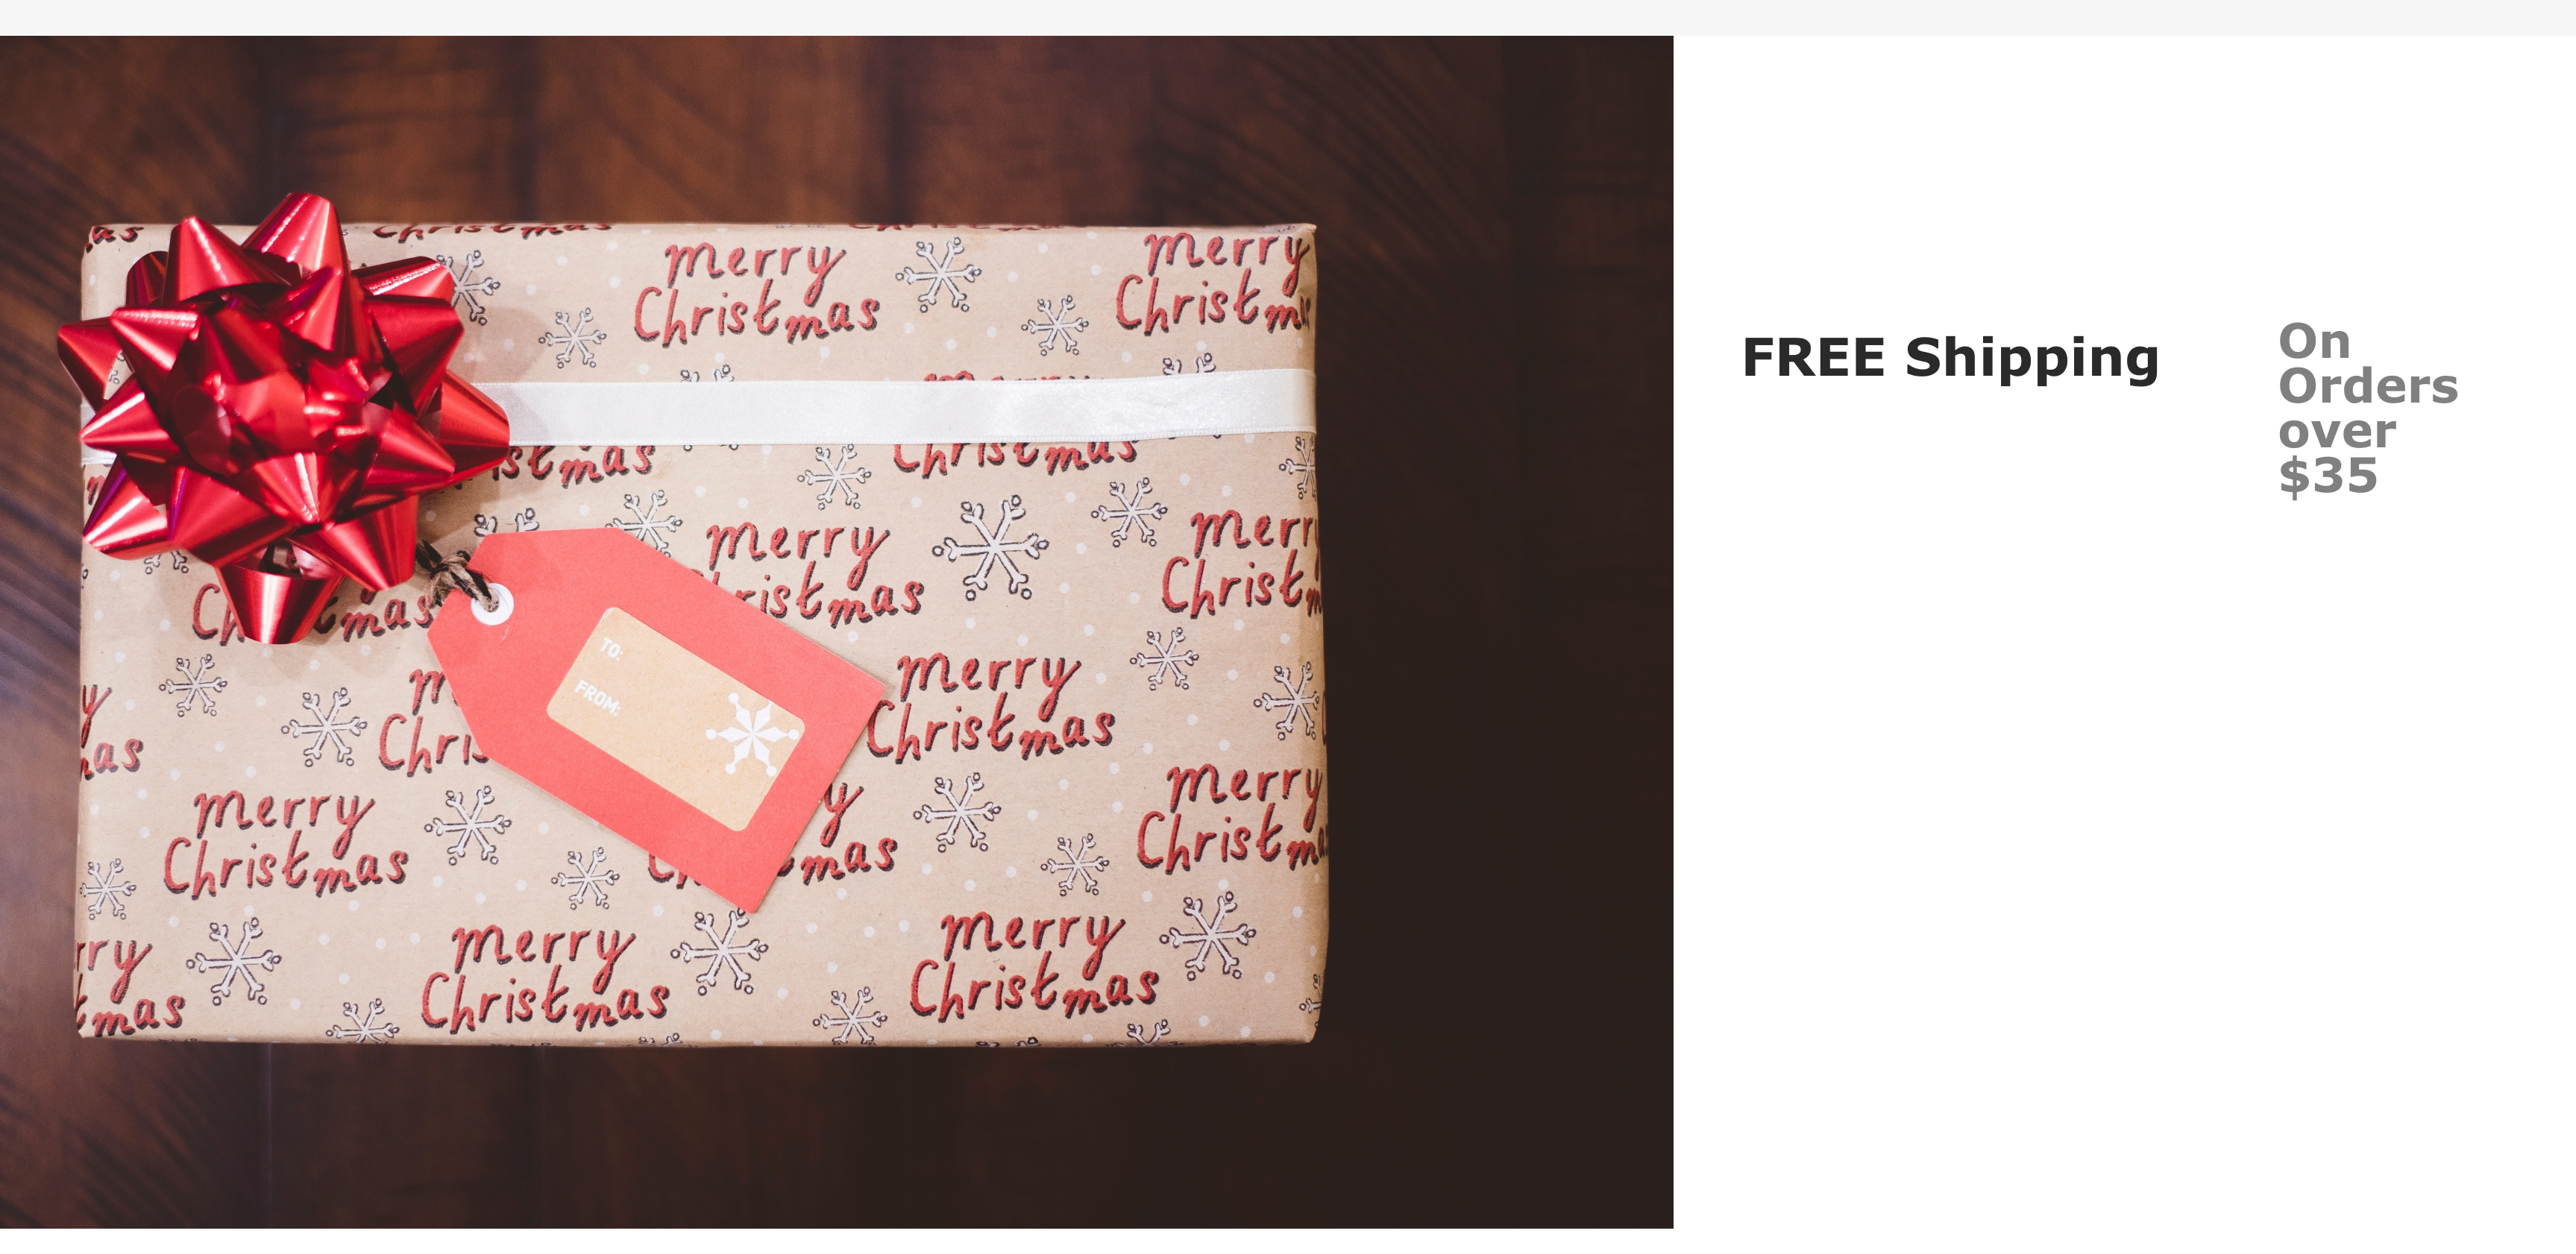 Order by Dec 18th to receive your Gifts by Christmas! - Spruced Roost